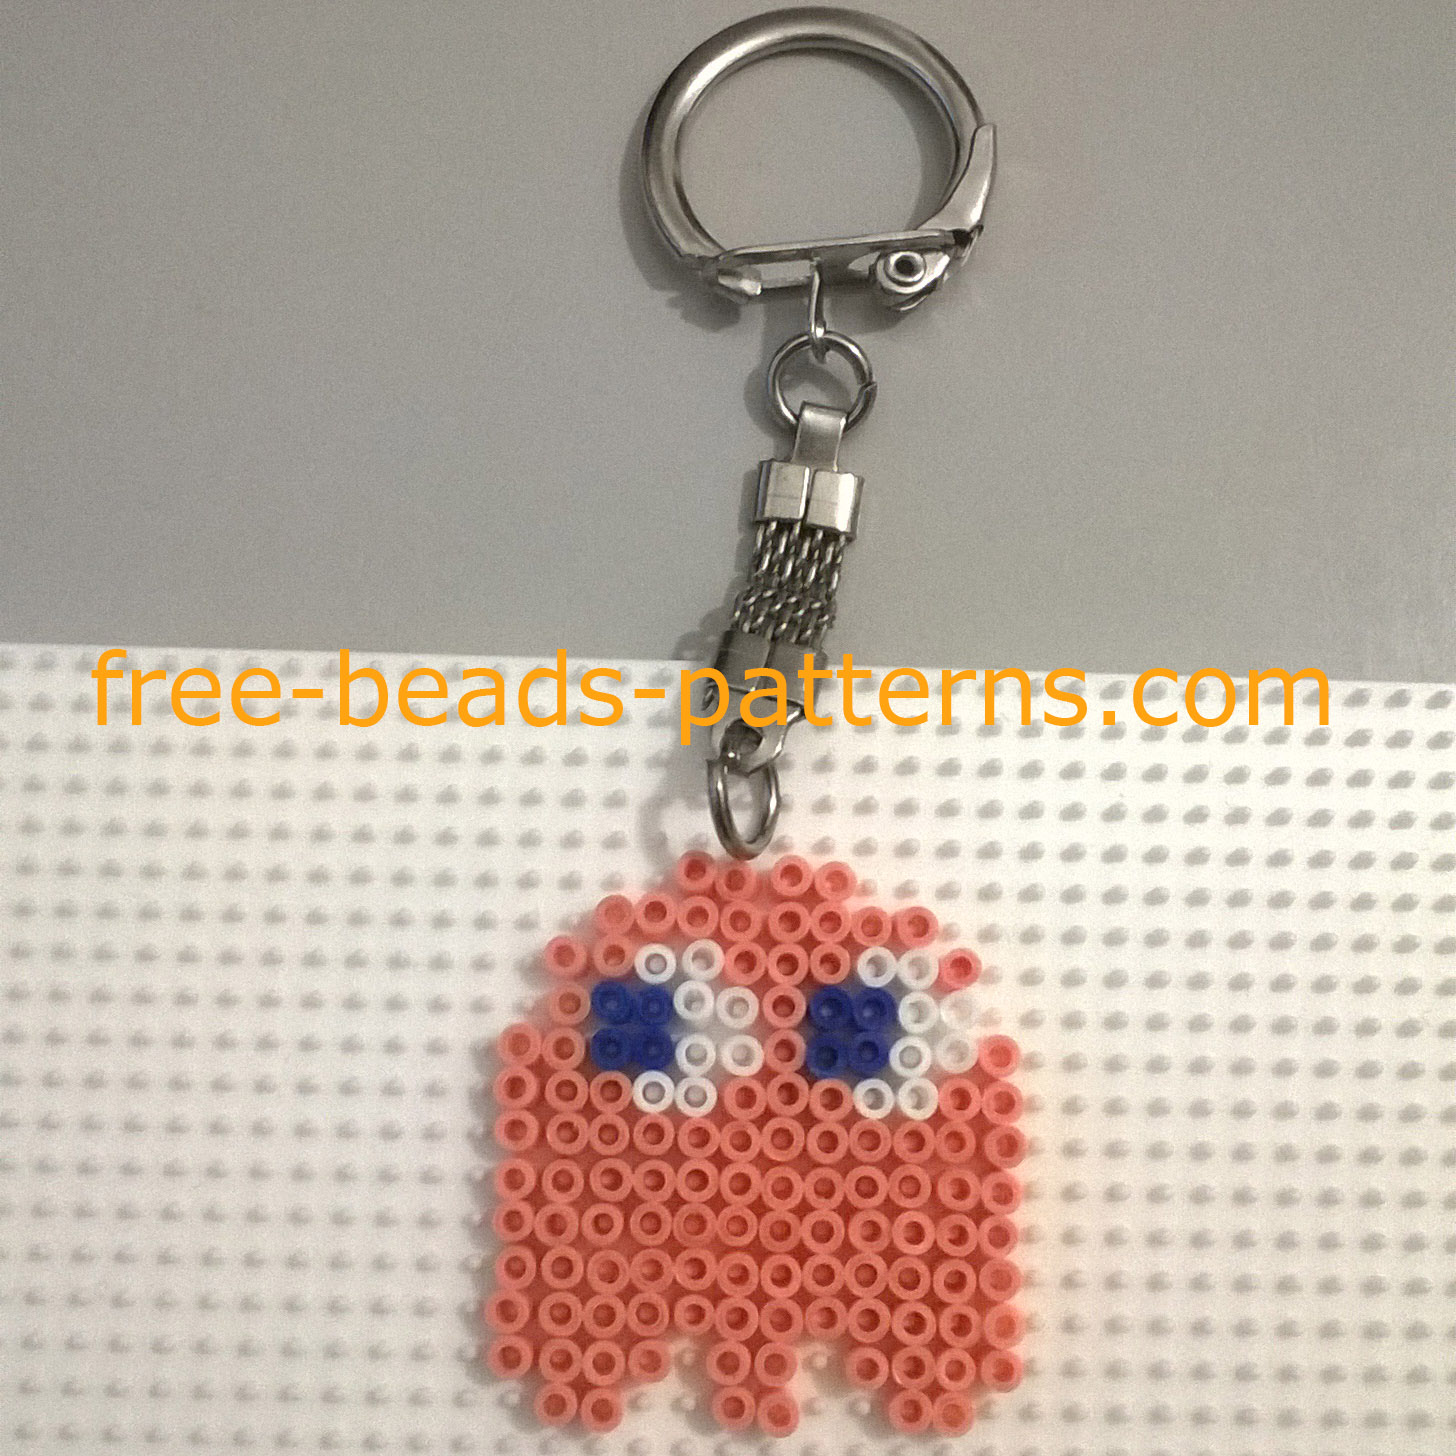 Pacman enemy Pinky work photo fuse beads author site user Bill (5)